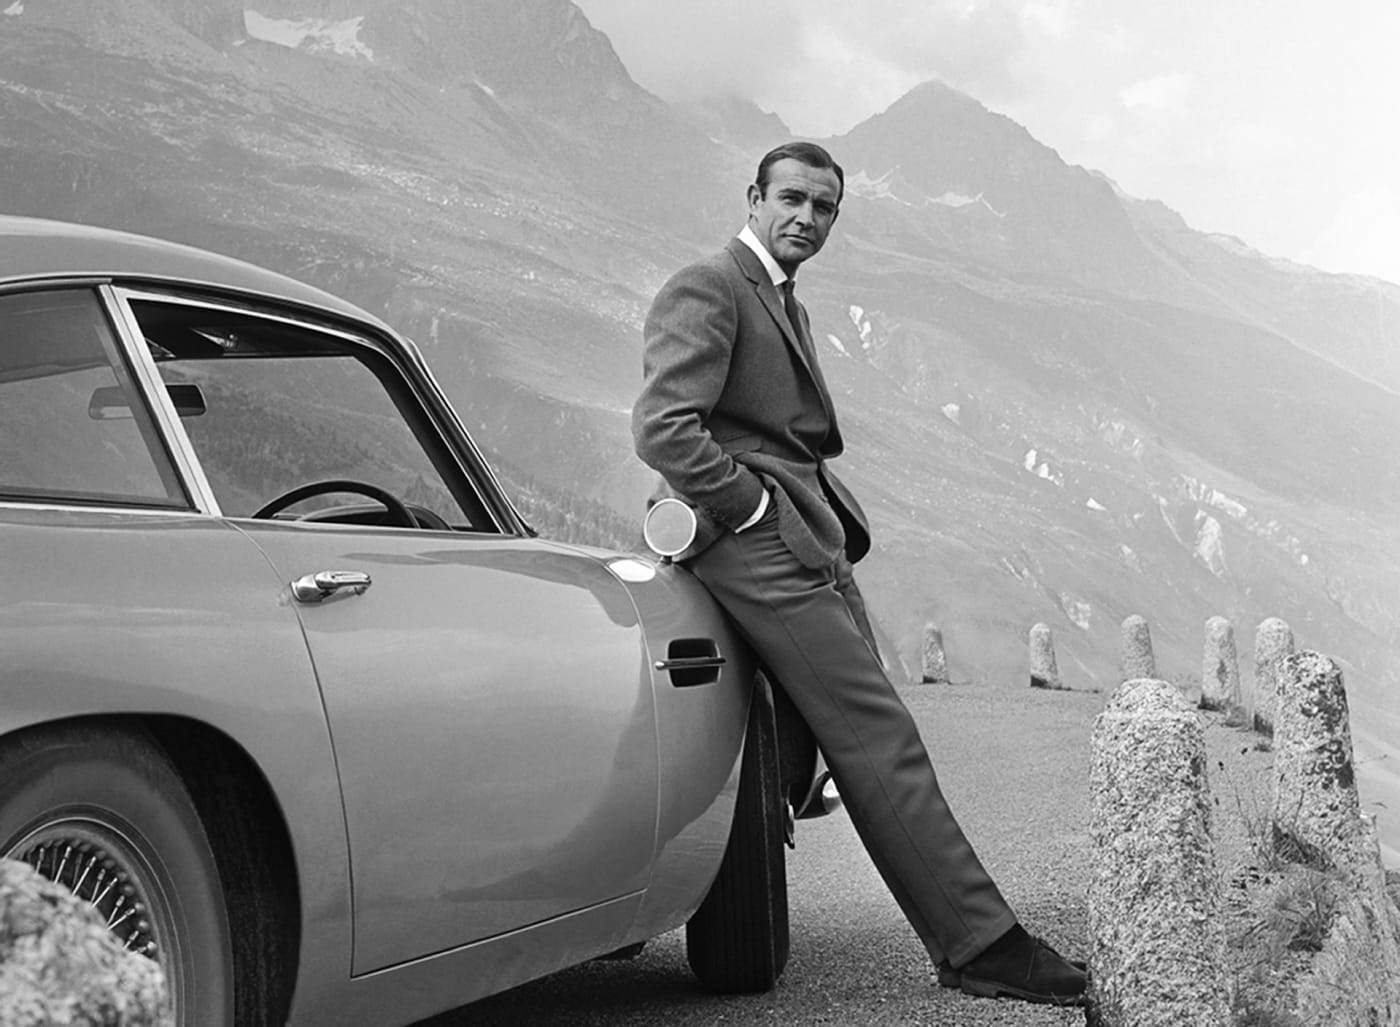 Sean Connery poses as James Bond next to his Aston Martin DB5 in a scene from 'Goldfinger'